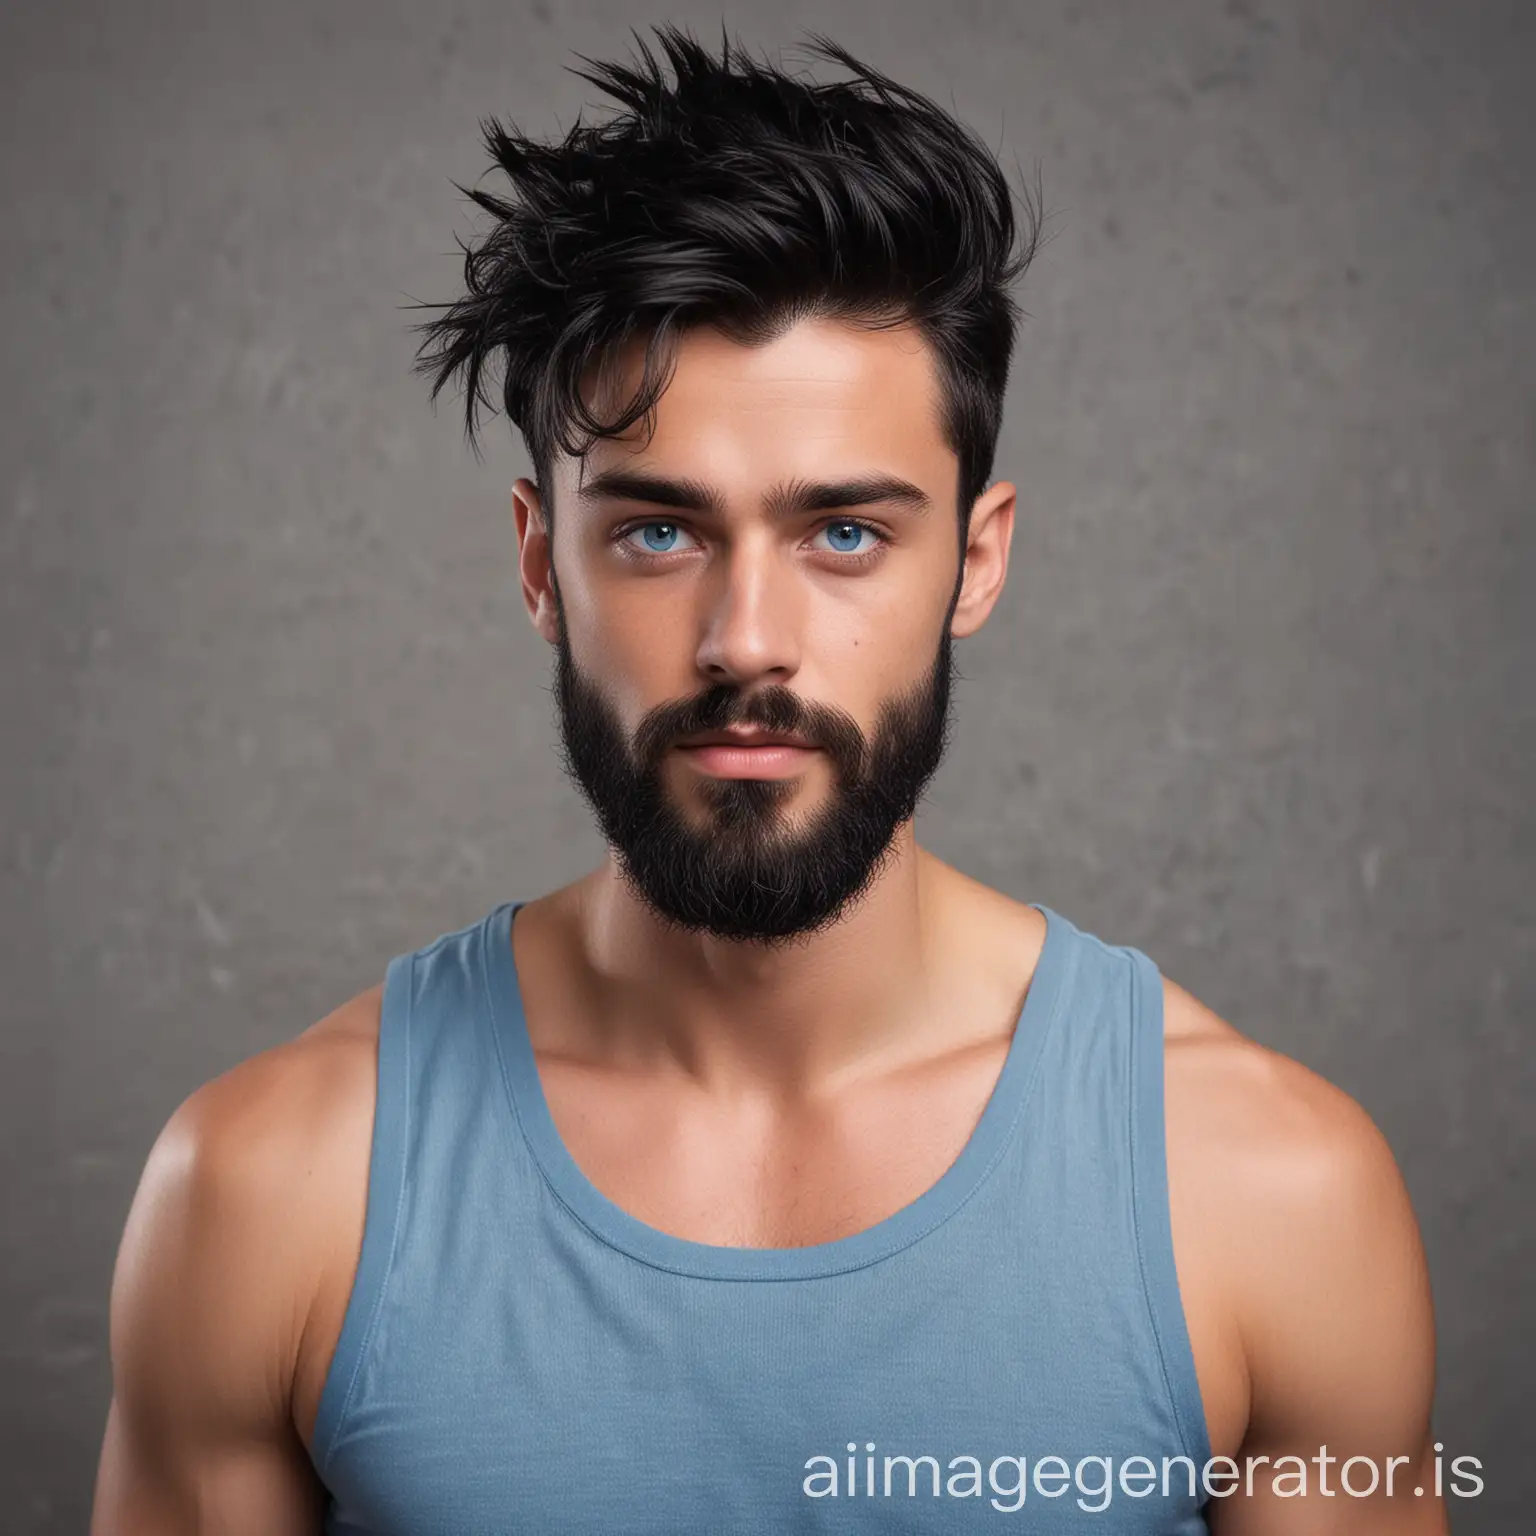 a young handsome Dutchmen with beard and black hair in a long high hair in a quiff.
Clear blue eyes
In a tanktop and a bit longer beard and chest hair peaking out of his tanktop
Verry muscular